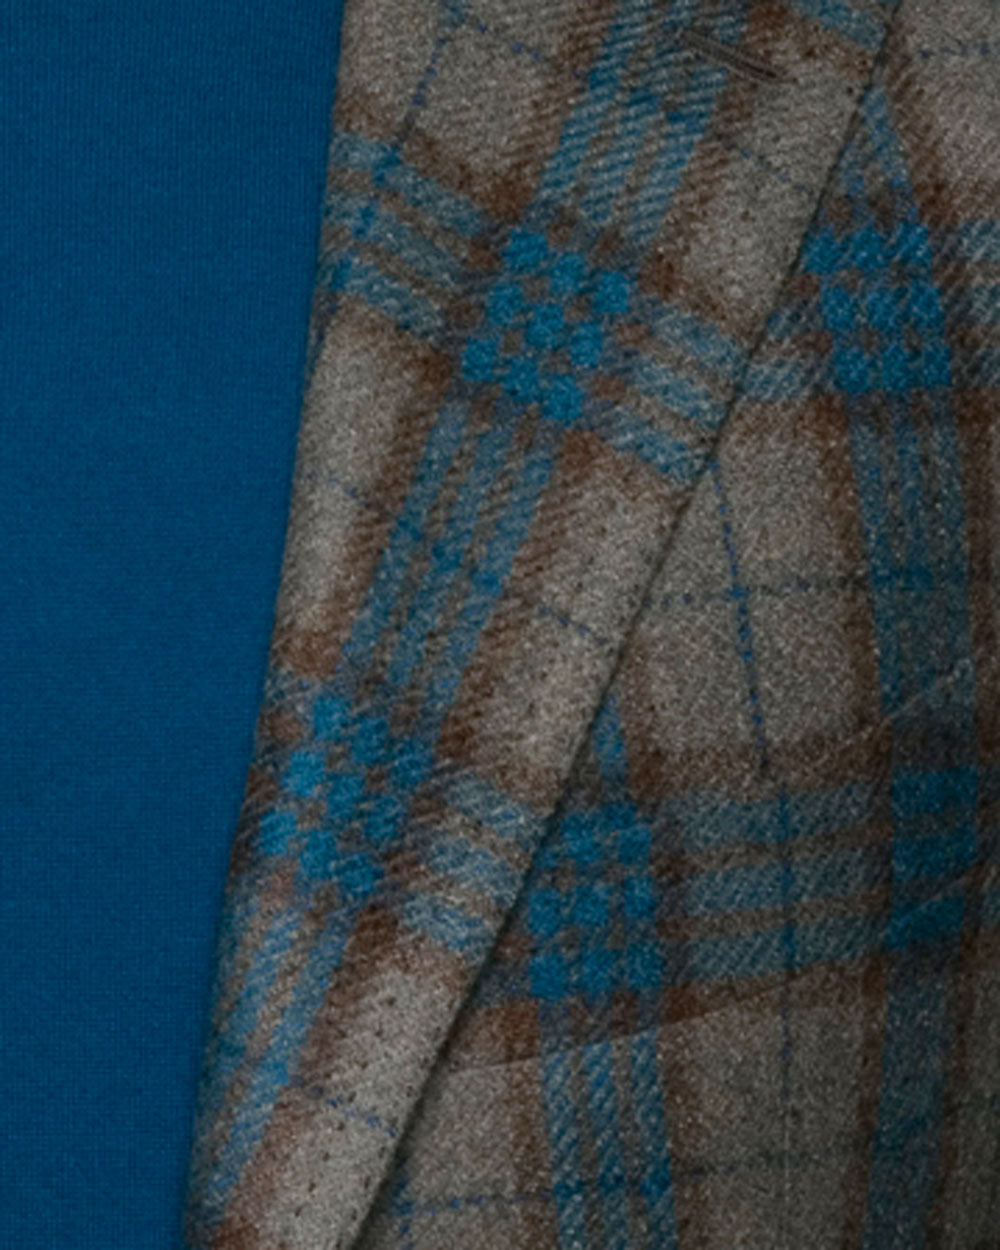 Grey and Peacock Blue Plaid Sportcoat